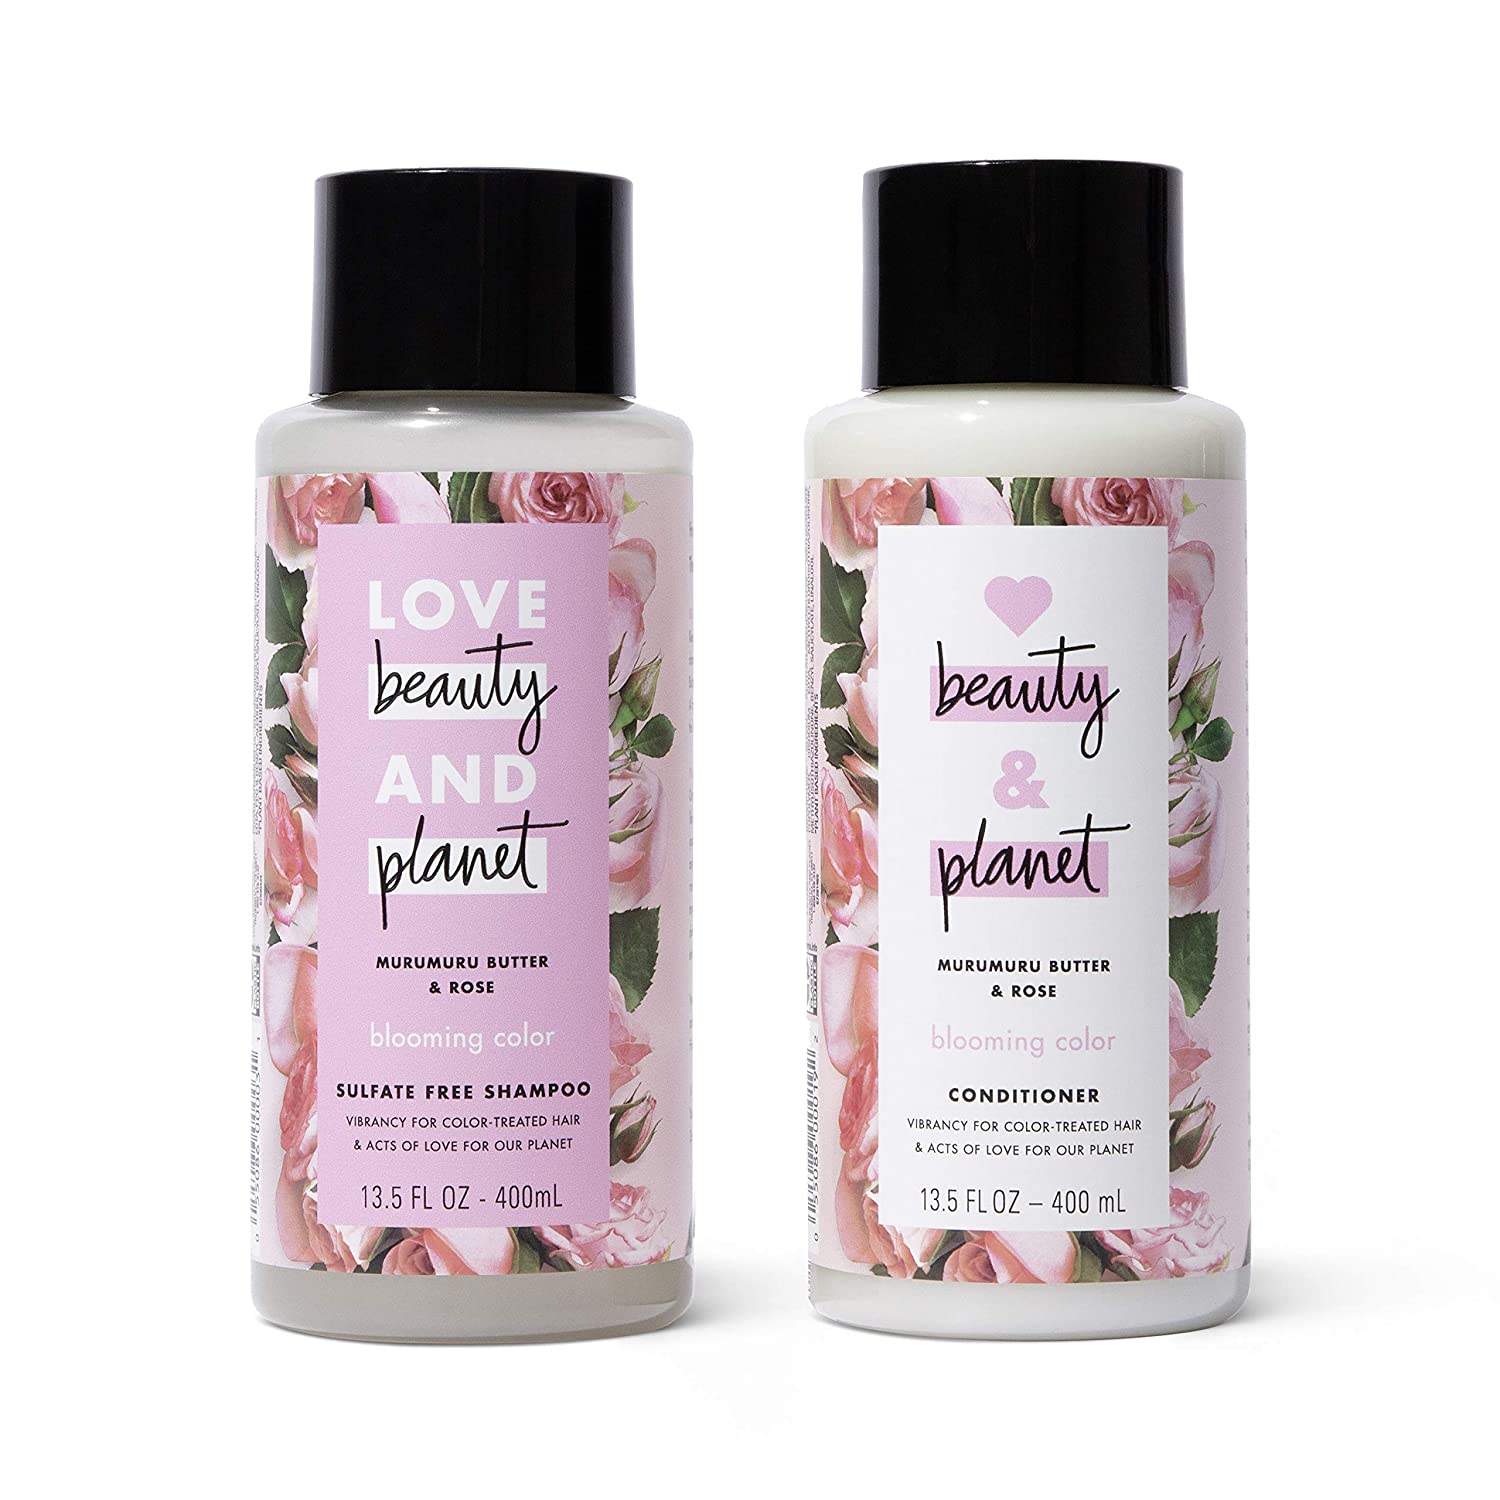 Love Beauty and Planet Blooming Color Murumuru Butter & Rose Shampoo and Conditioner